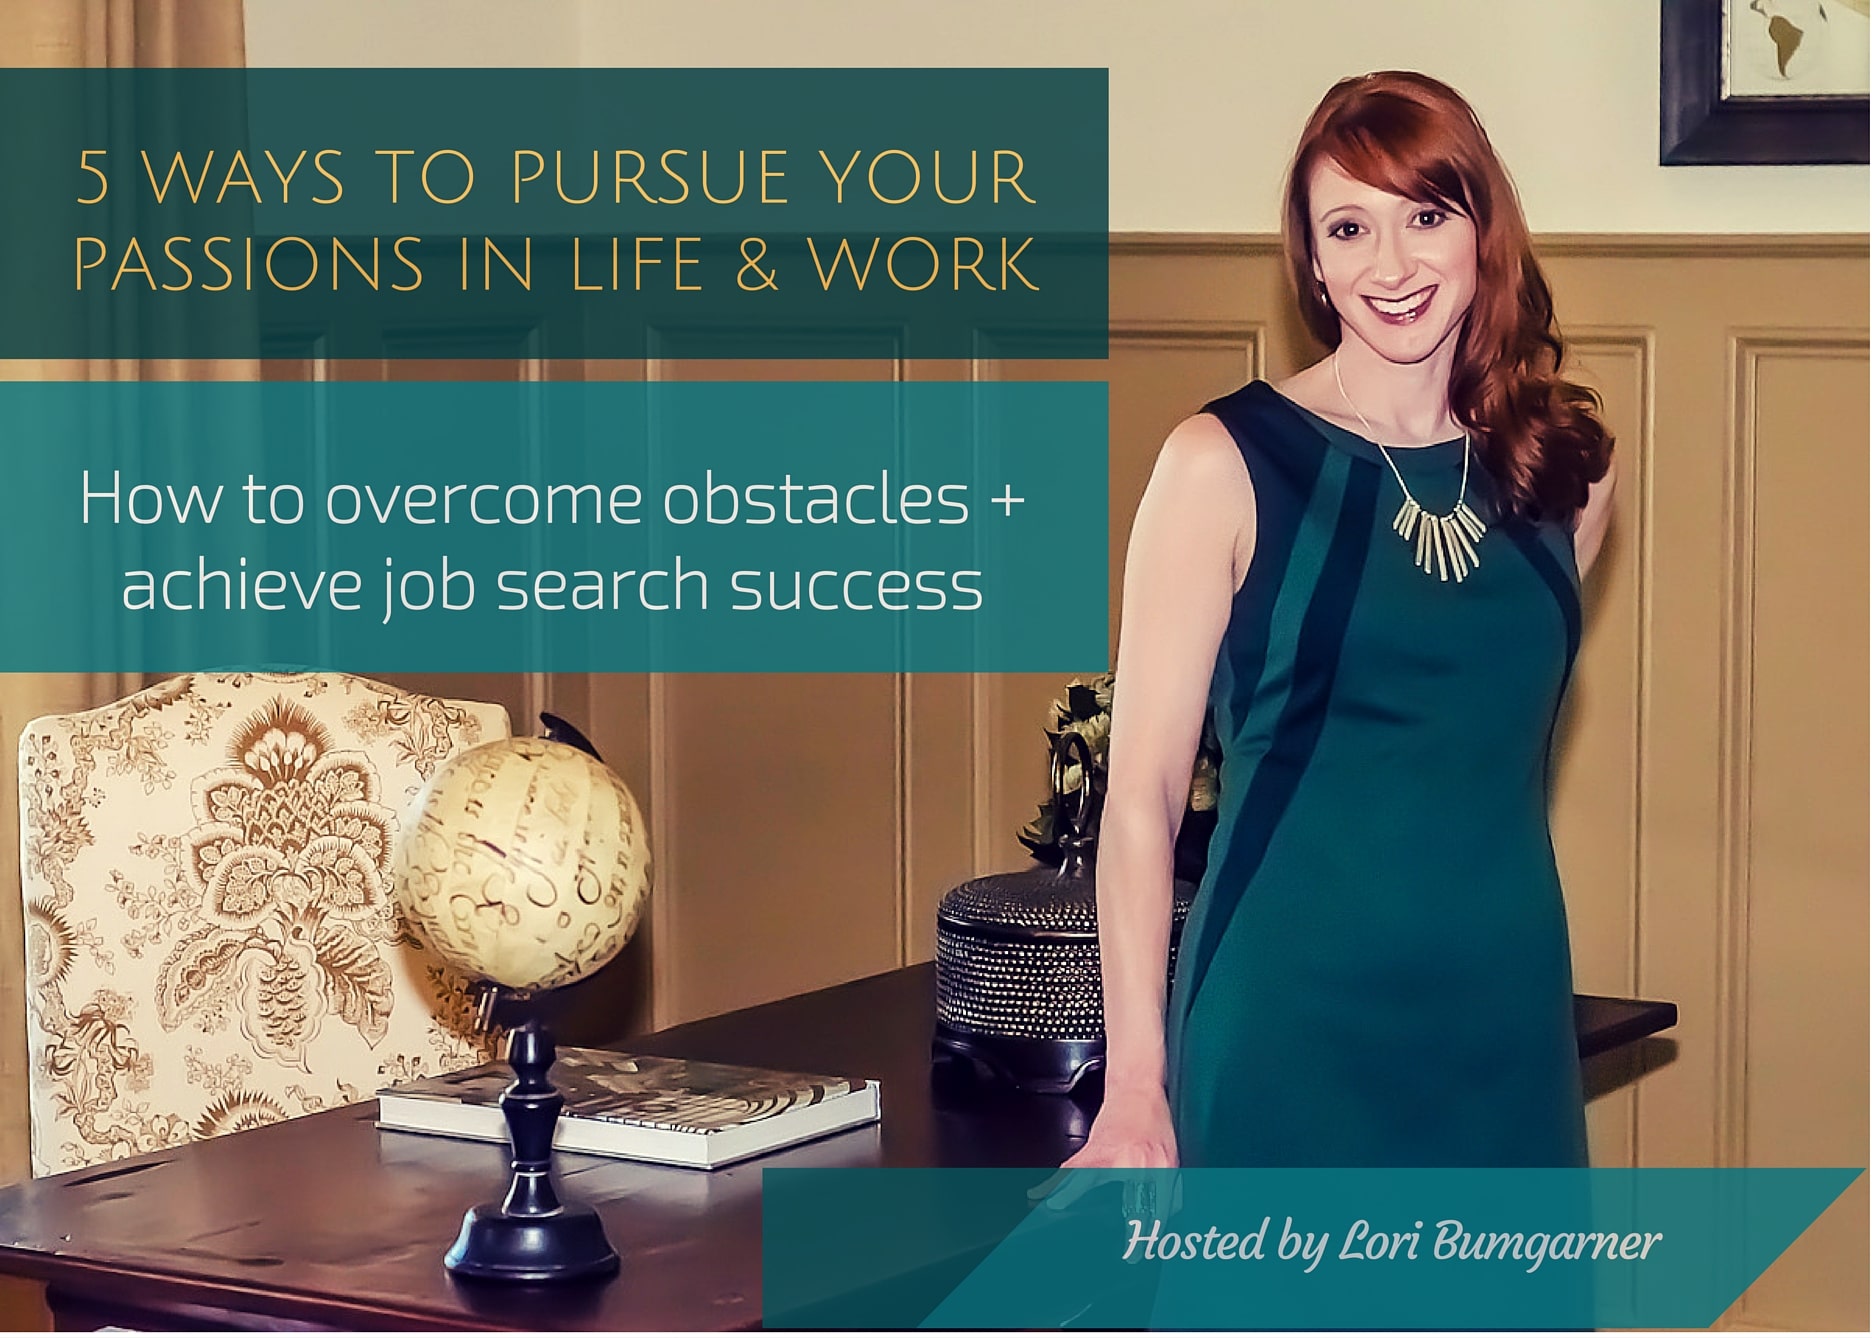 5 Ways to Pursue Your Passions in Life and Work, hosted by Passion & Career Specialist Lori Bumgarner